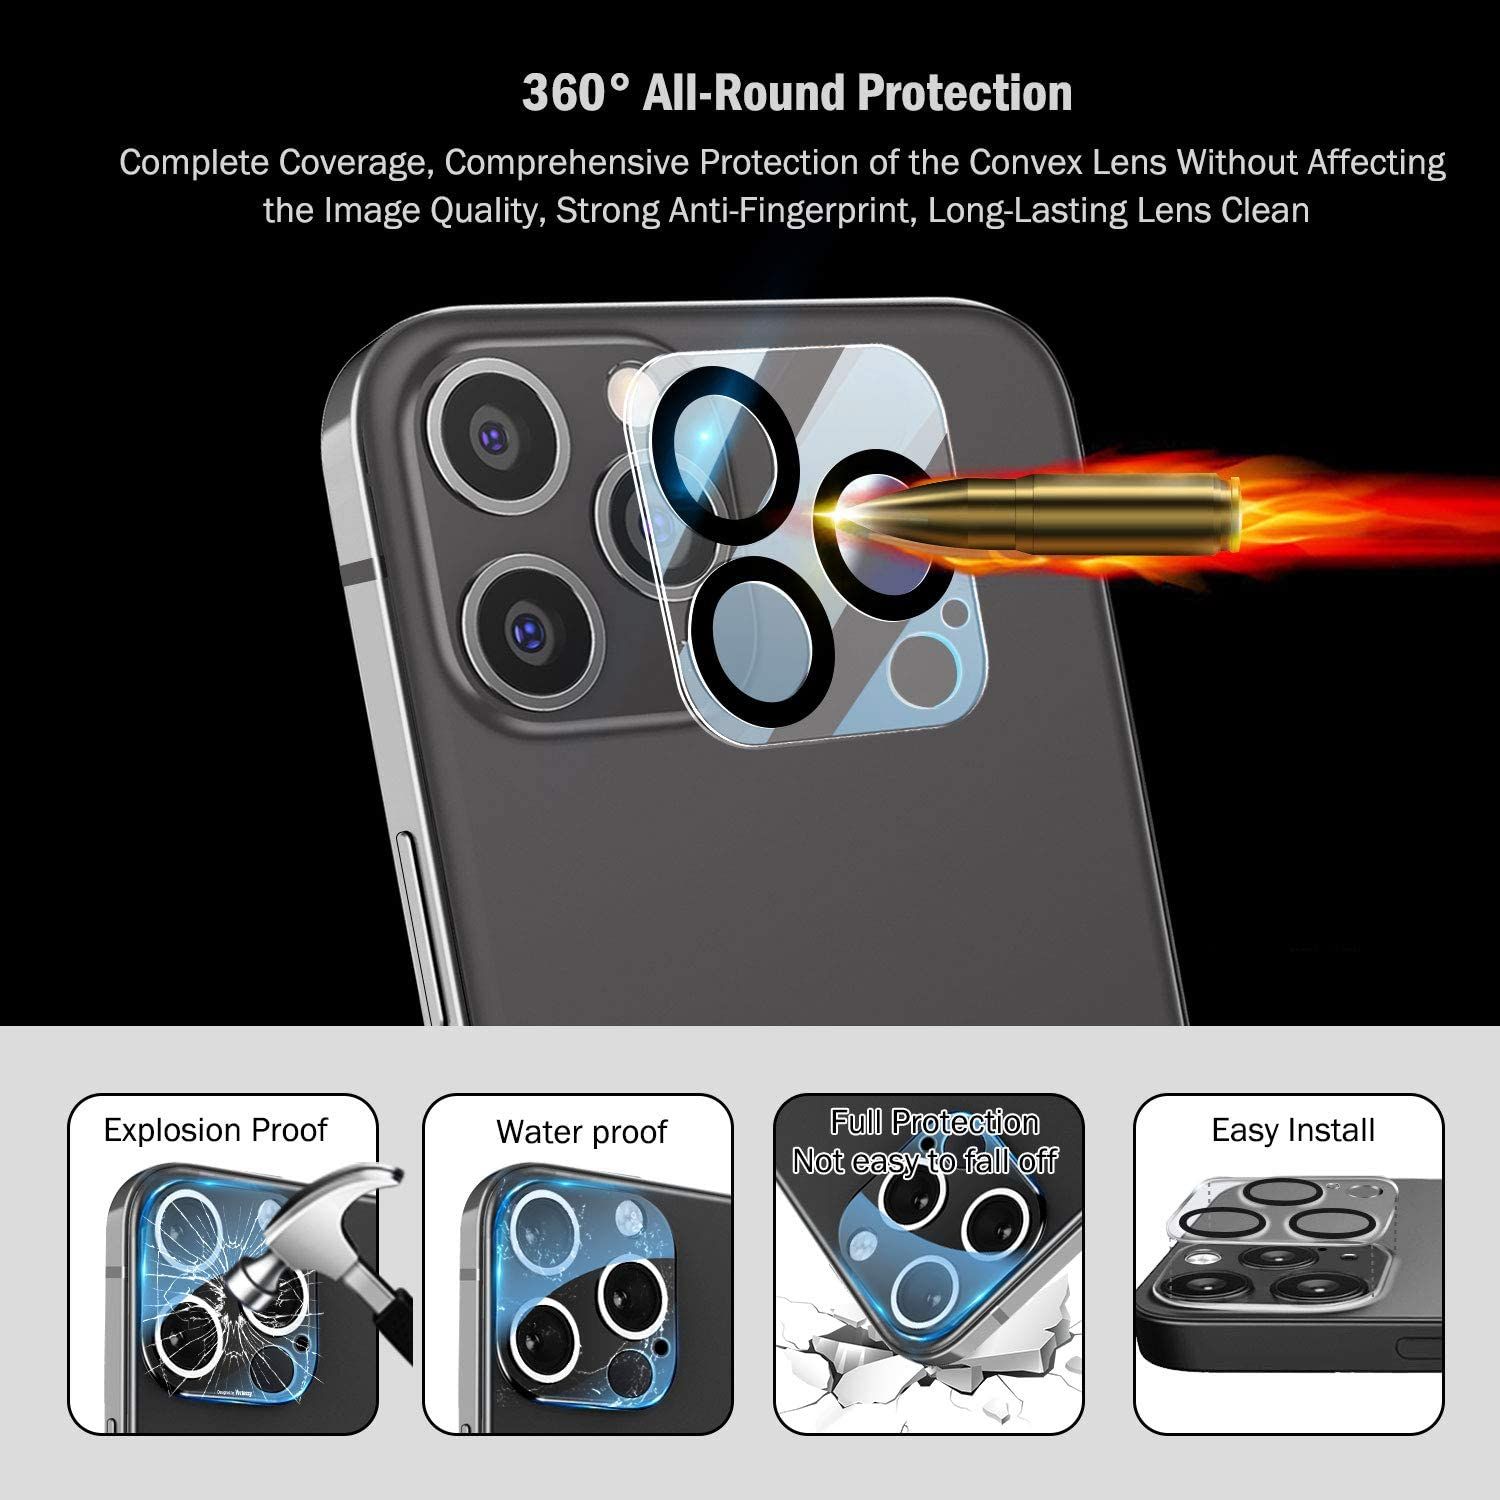 Camera screen protector for iPhone 12 Pro.